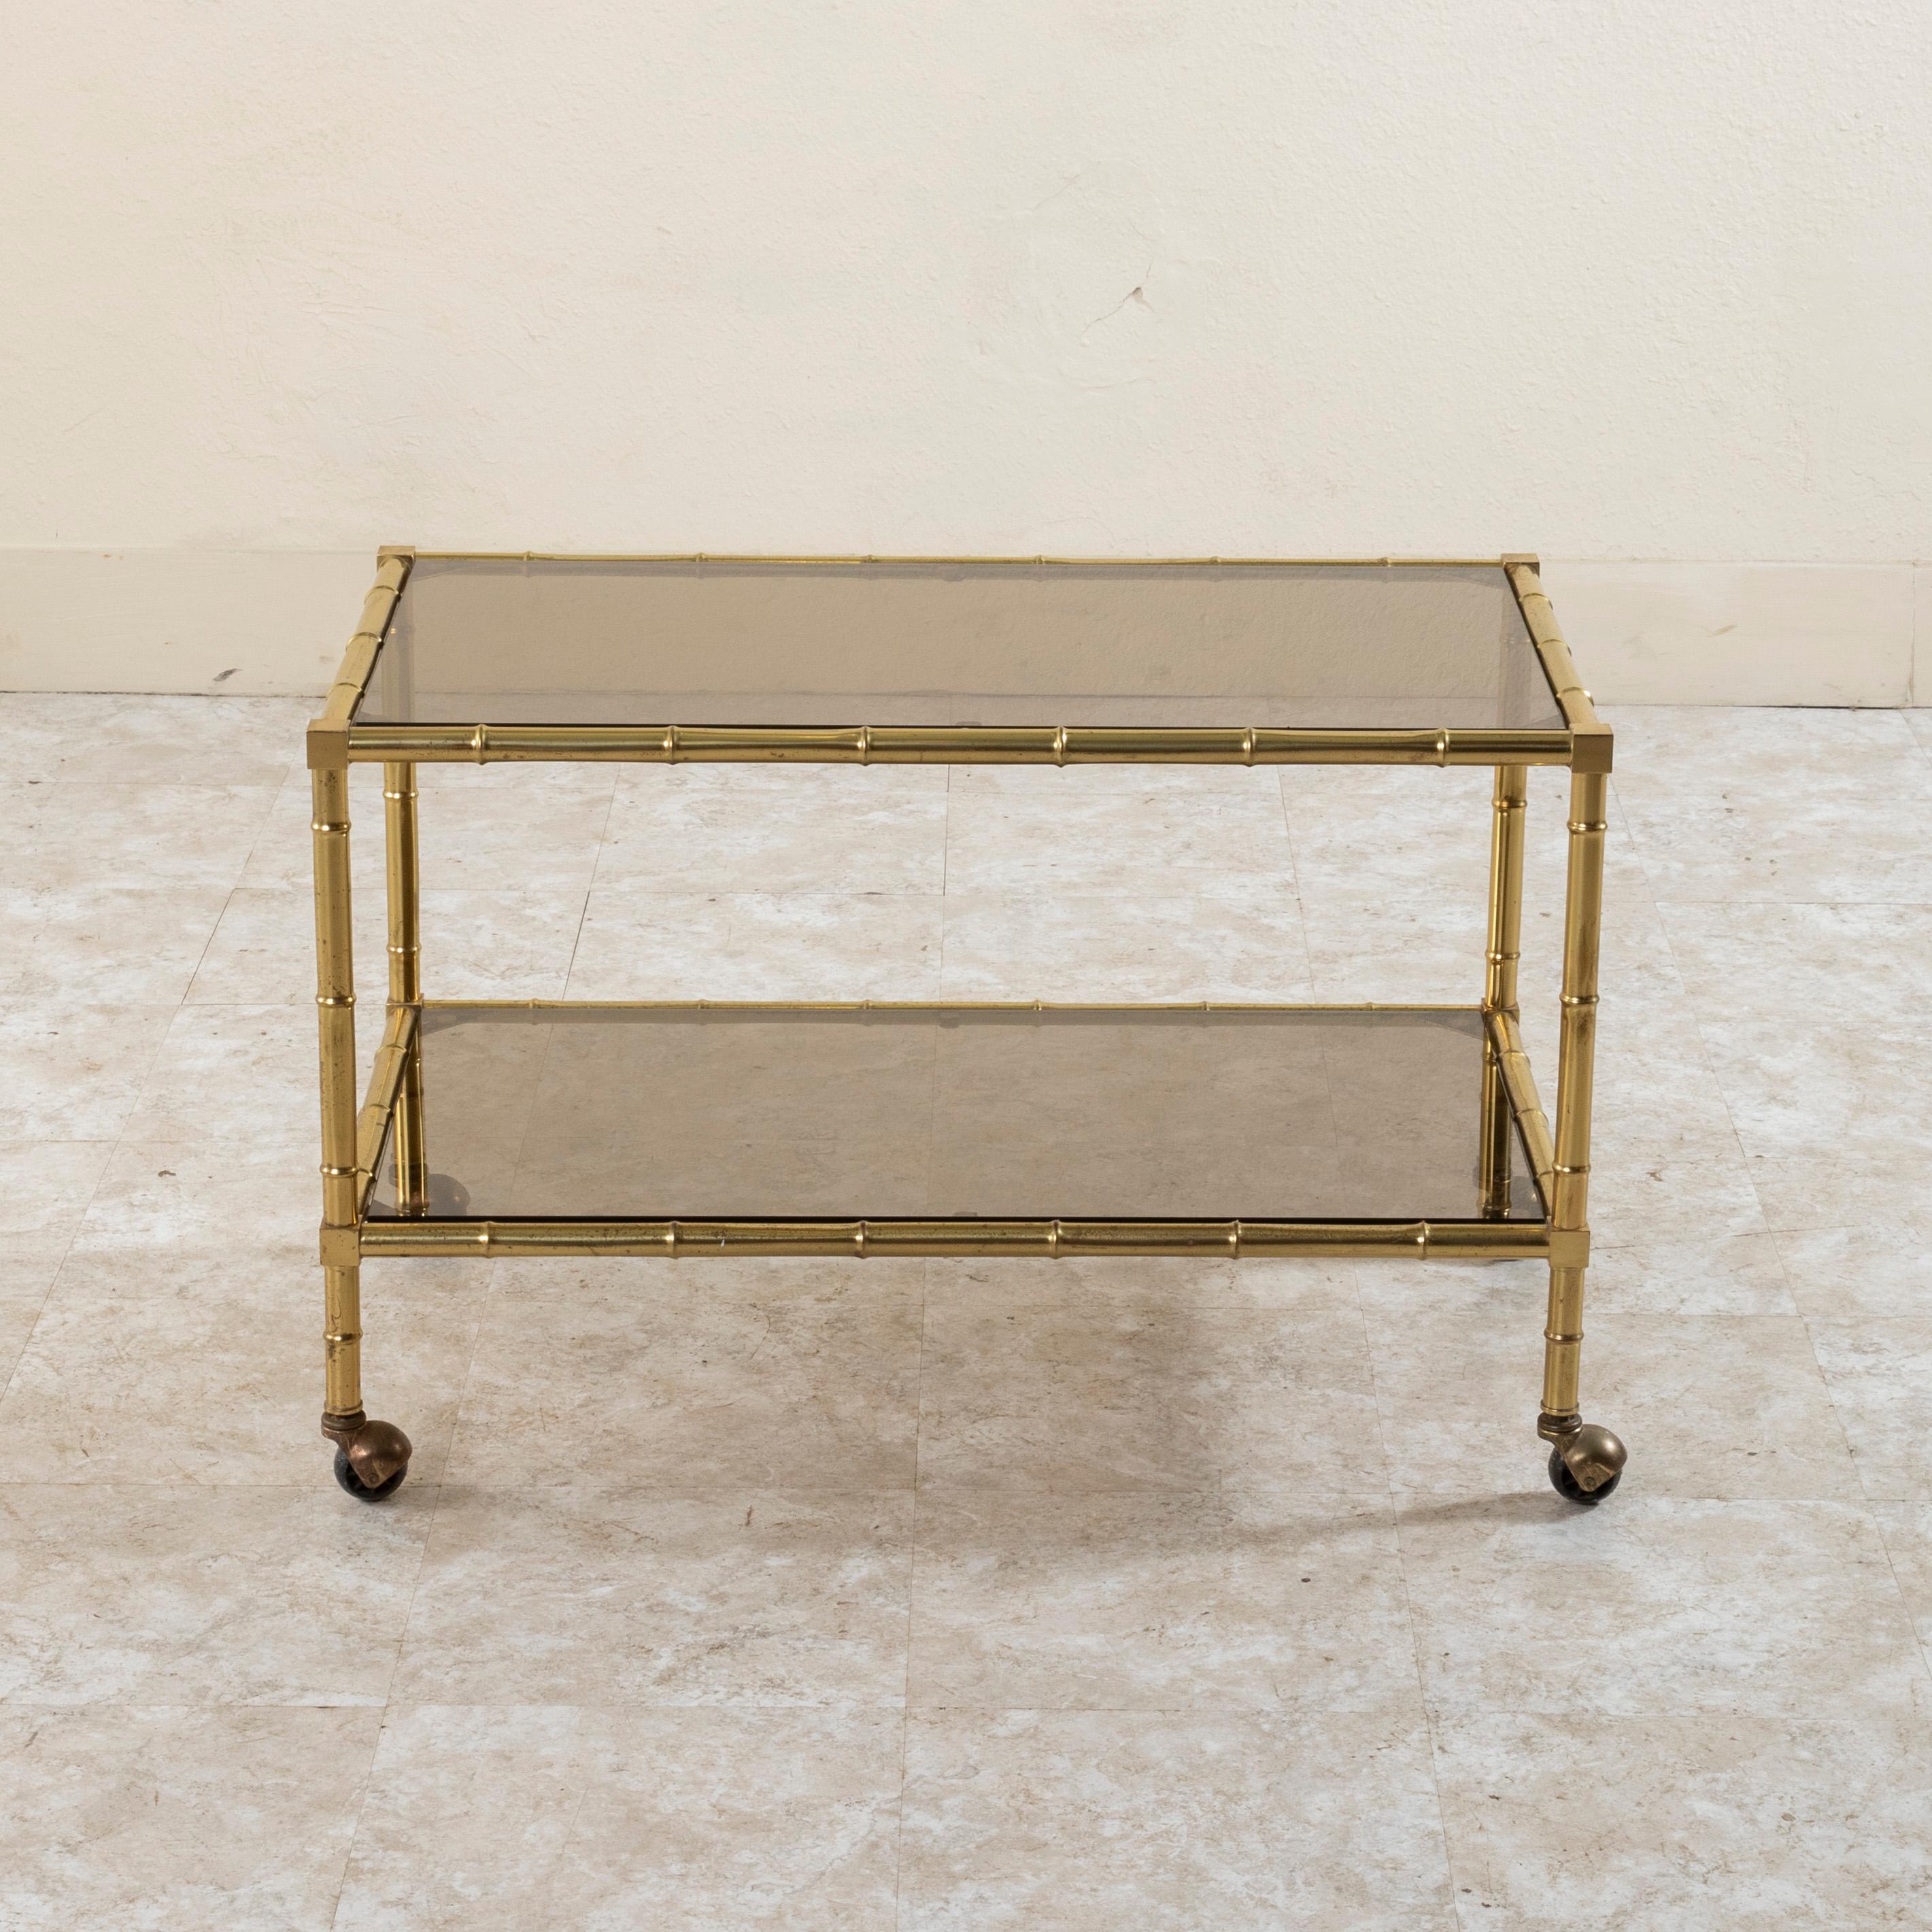 This mid twentieth century French coffee table or bar cart features a faux bamboo brass frame. Two smoked glass shelves provide ample display space. The piece rests on casters, allowing for it to be easily moved. At 20 inches in height, this piece